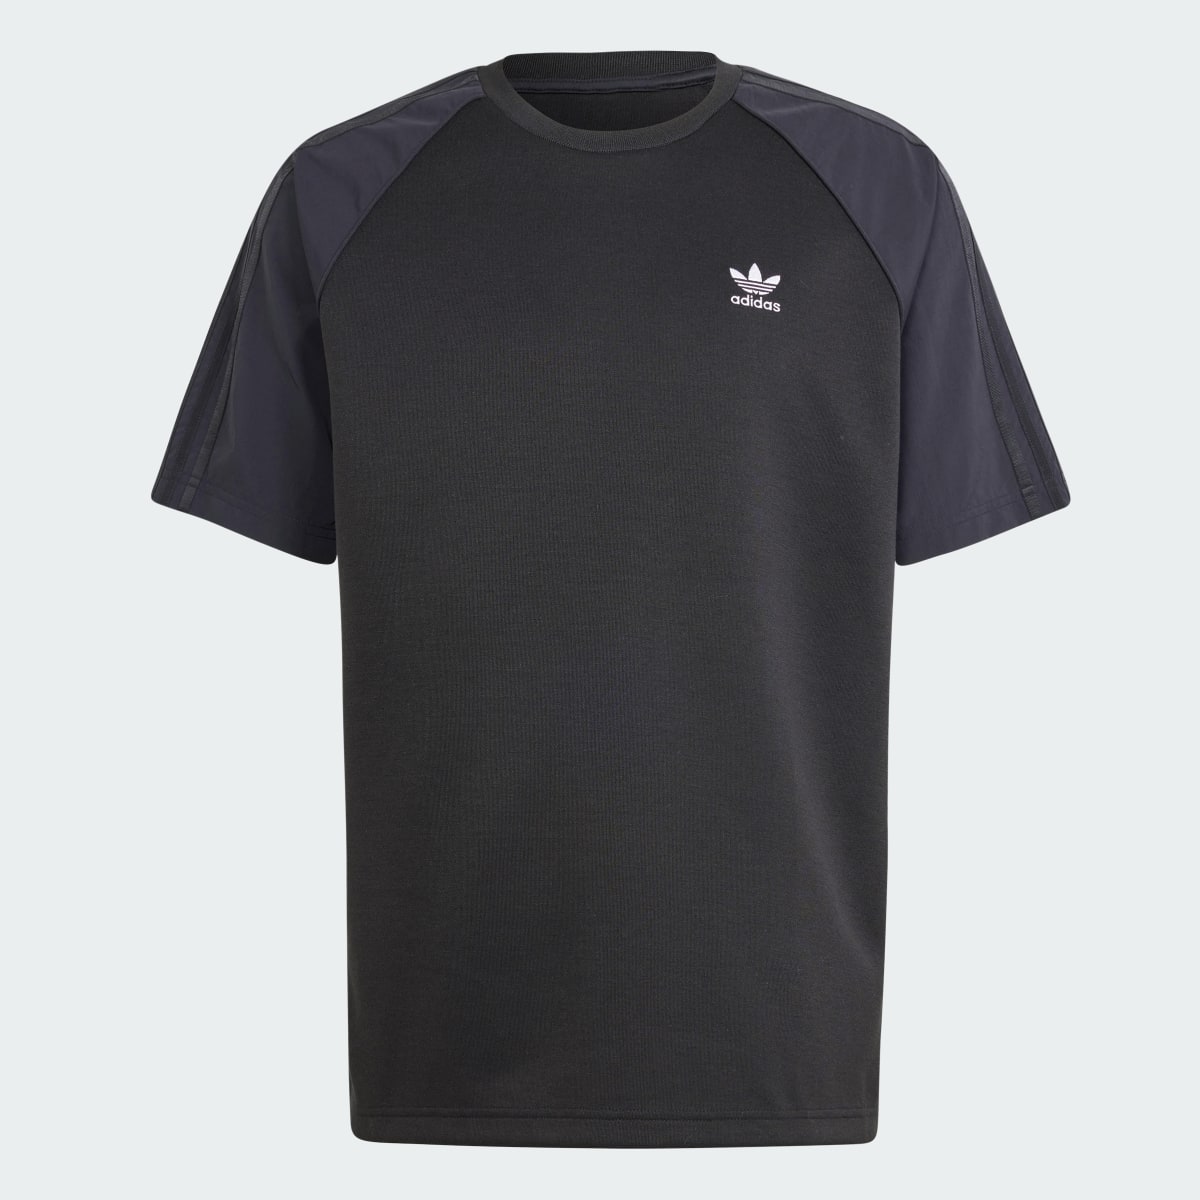 Adidas T-shirt adicolor Re-Pro SST Material Mix. 5